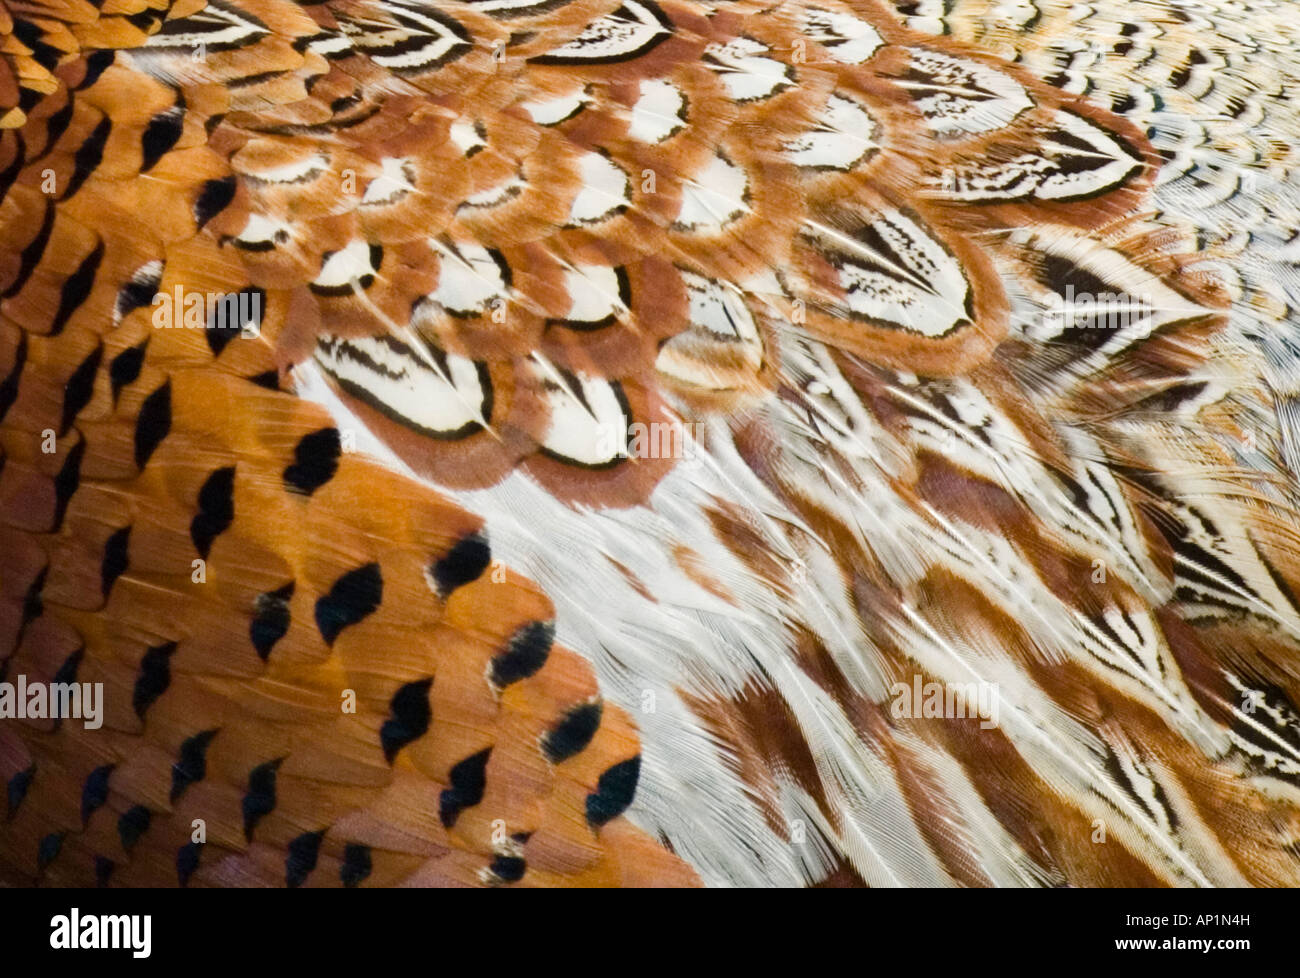 Pheasant showing feather detail Stock Photo